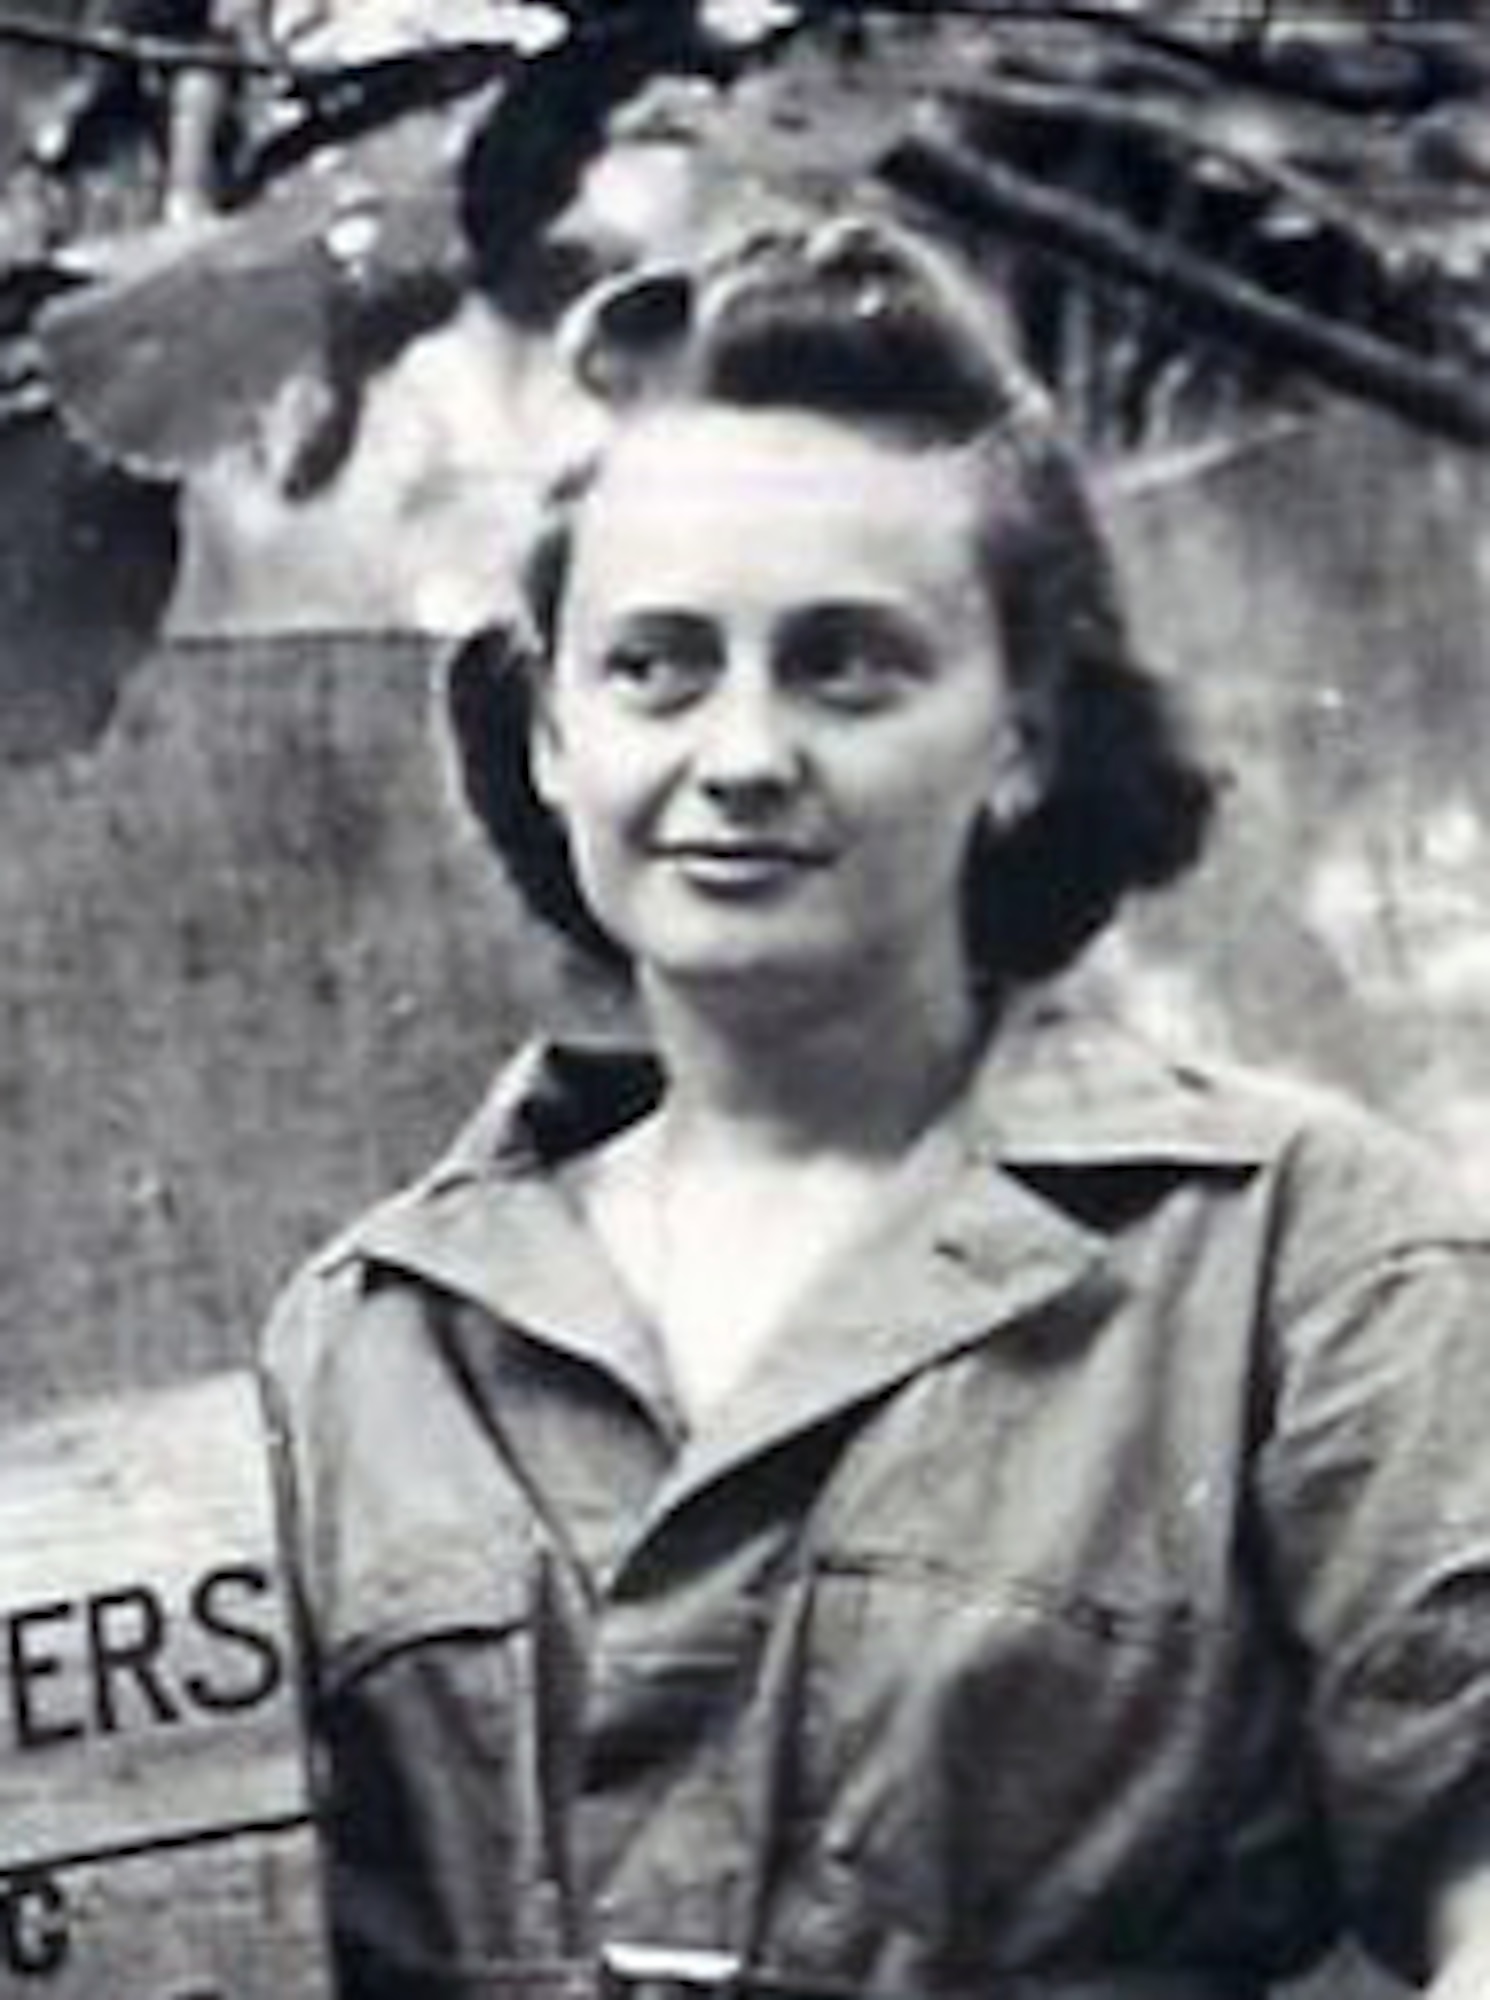 After escaping the province of Bataan just before it fell to invading Japanese forces, Lt. Col. Helen Hennessey found herself on the island of Corregidor in the Philippines. This image was taken there, where she helped take care of the sick and wounded in an underground 1,000-bed hospital. 